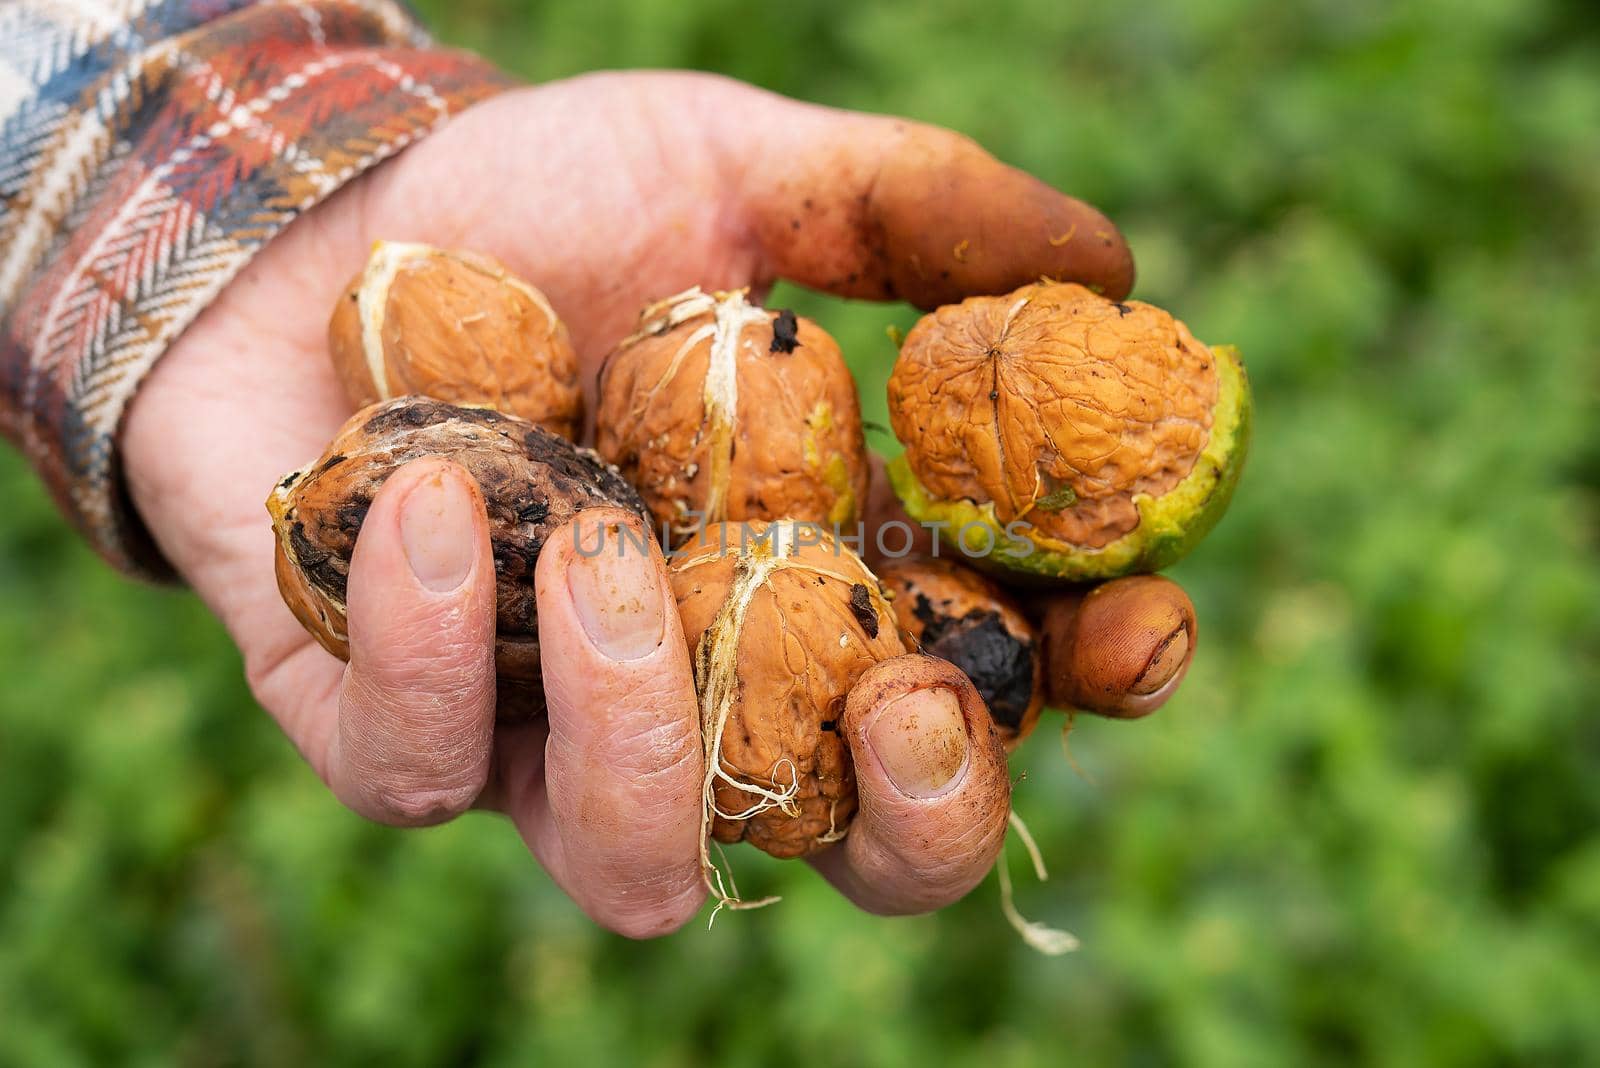 A man holds a whole walnut in his hands. Harvesting. Whole walnut, healthy organic food concept